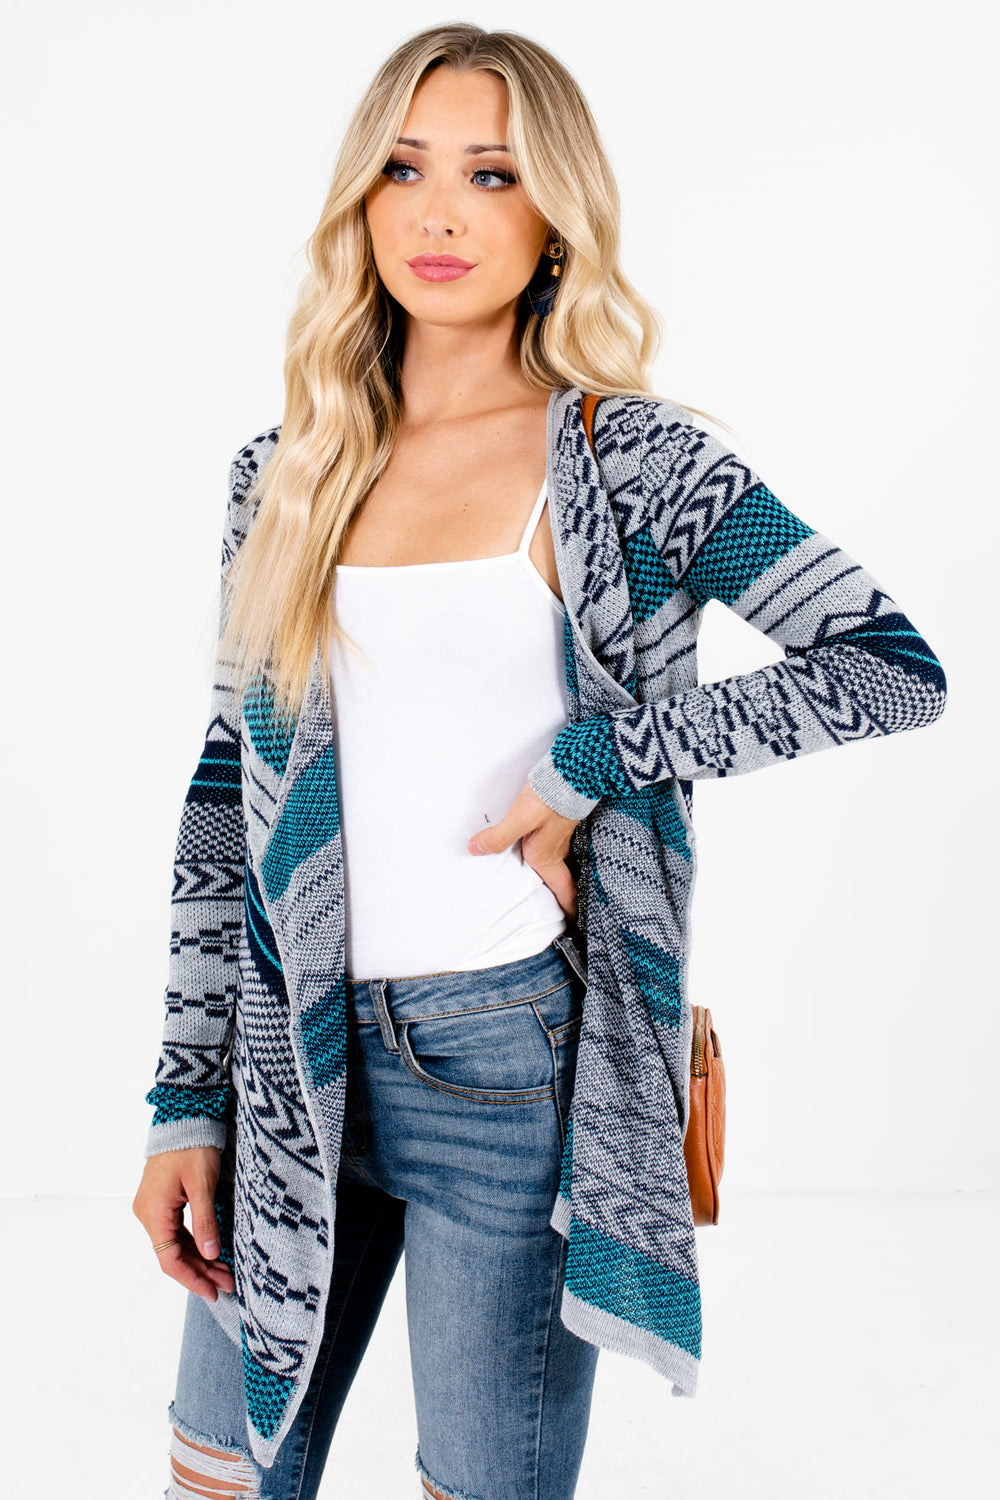 You're The One Blue Patterned Cardigan | Boutique Cardigan - Bella Ella ...